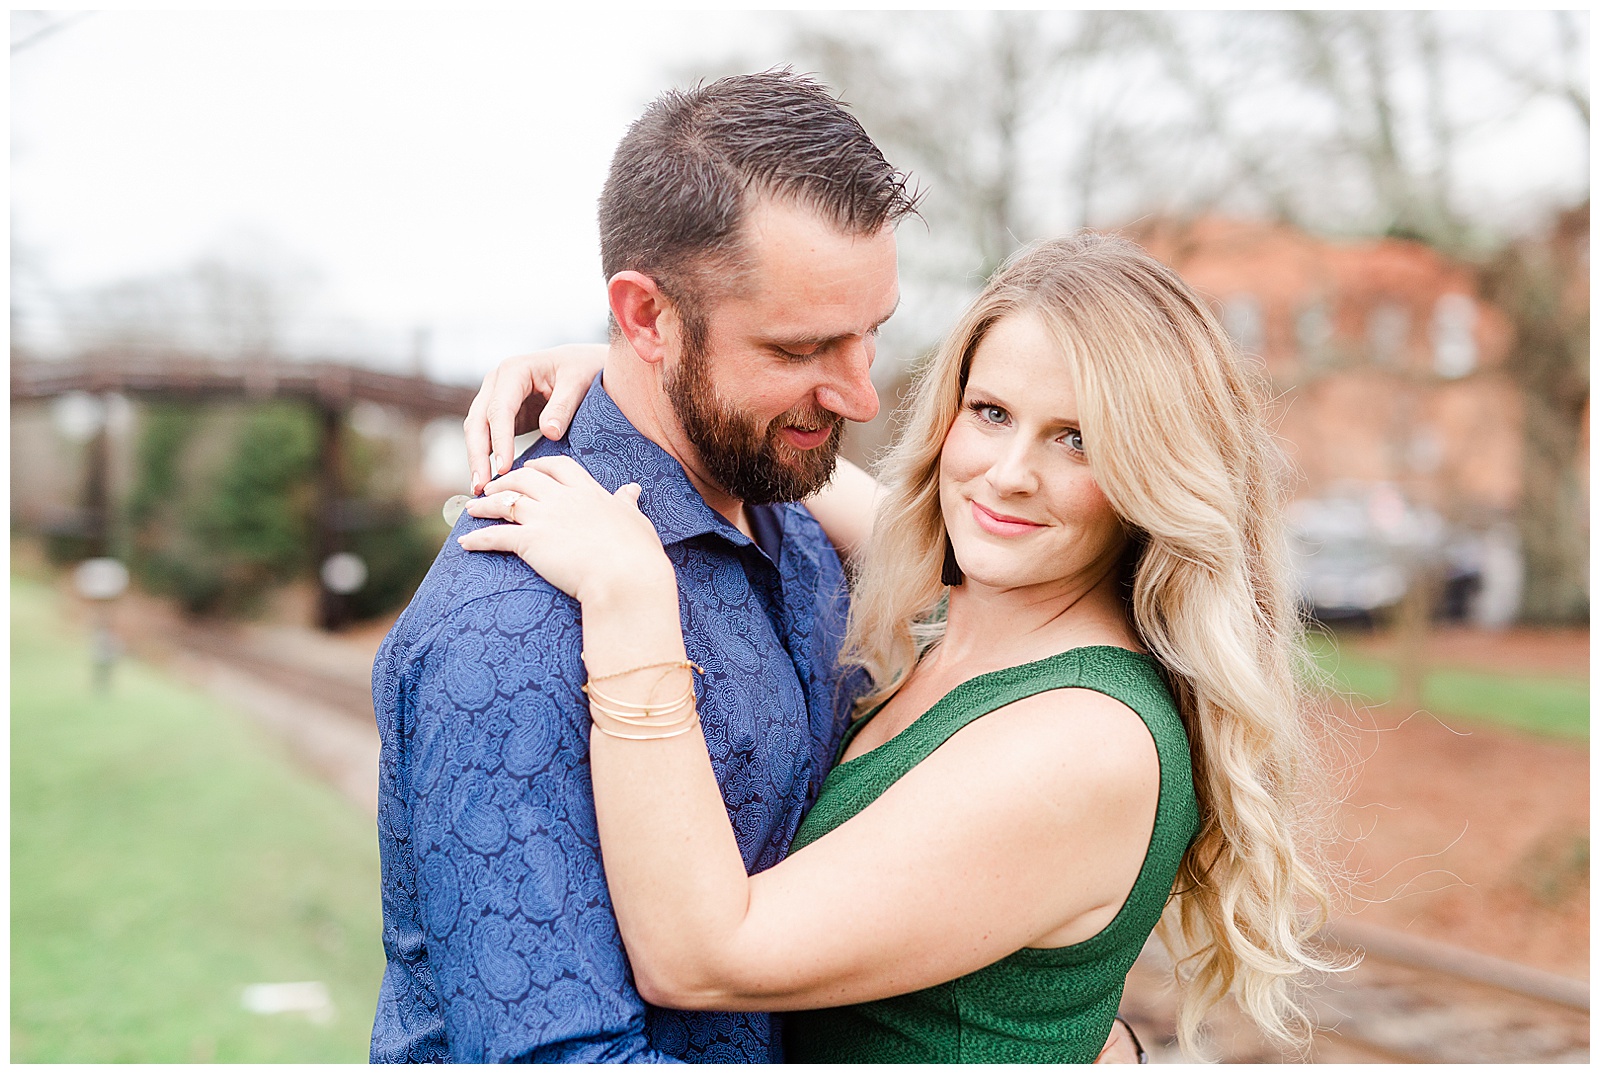 Adorable couple near old train tracks in downtown Waxhaw, NC Engagement Session with Green Dress Outfit Ideas